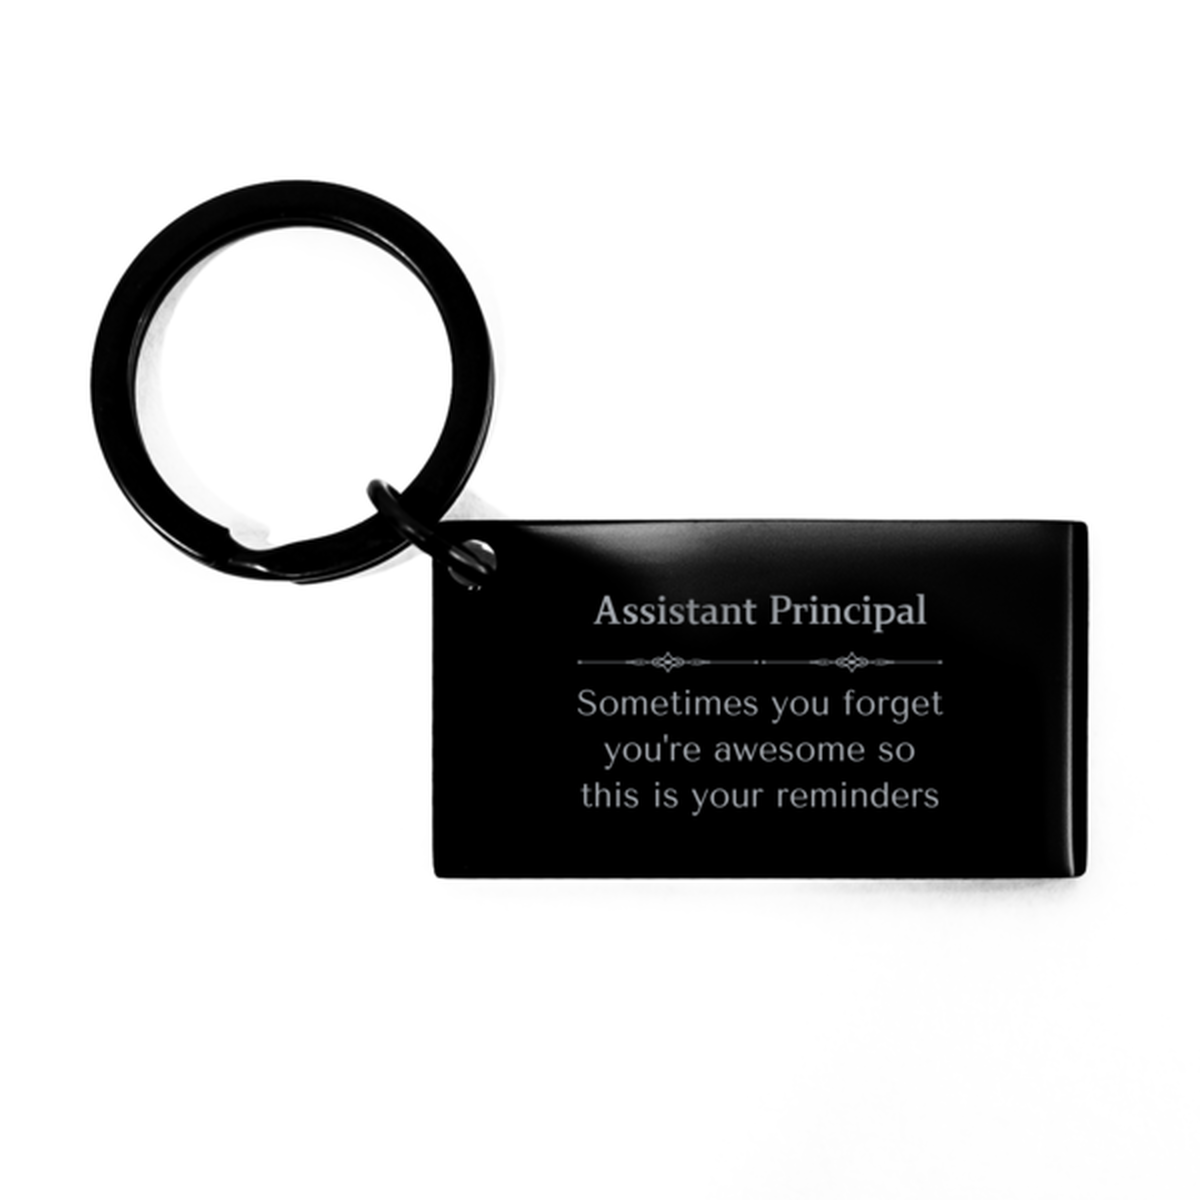 Sentimental Assistant Principal Keychain, Concierge Sometimes you forget you're awesome so this is your reminders, Graduation Christmas Birthday Gifts for Assistant Principal, Men, Women, Coworkers